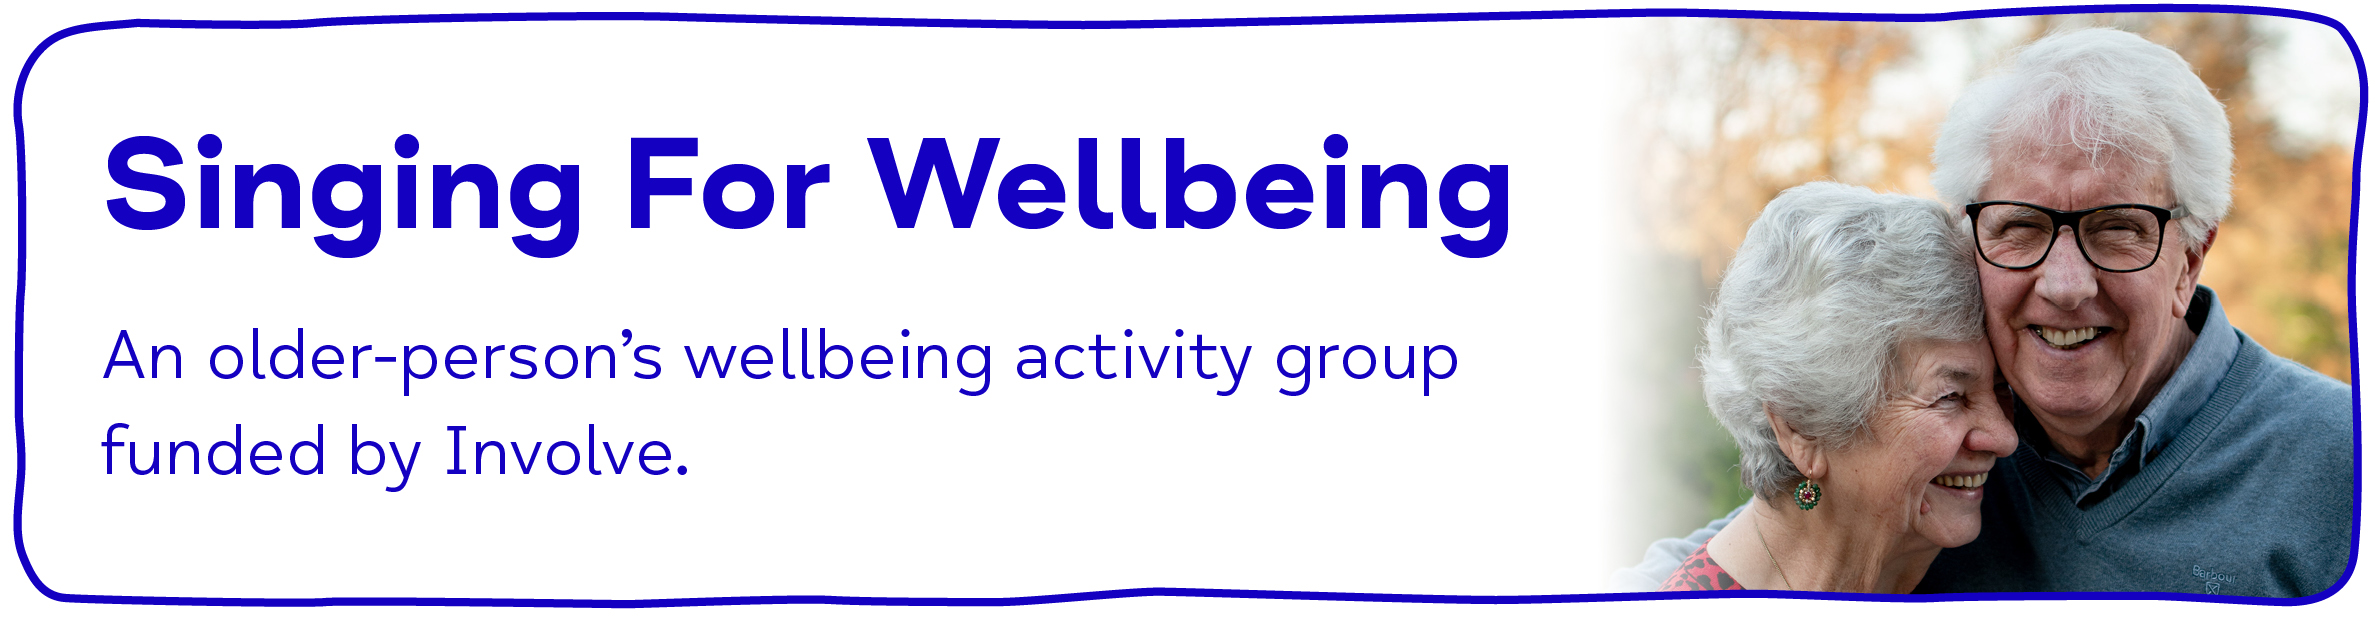 Singing For Wellbeing. An older person's wellbeing activity group funded by Involve.